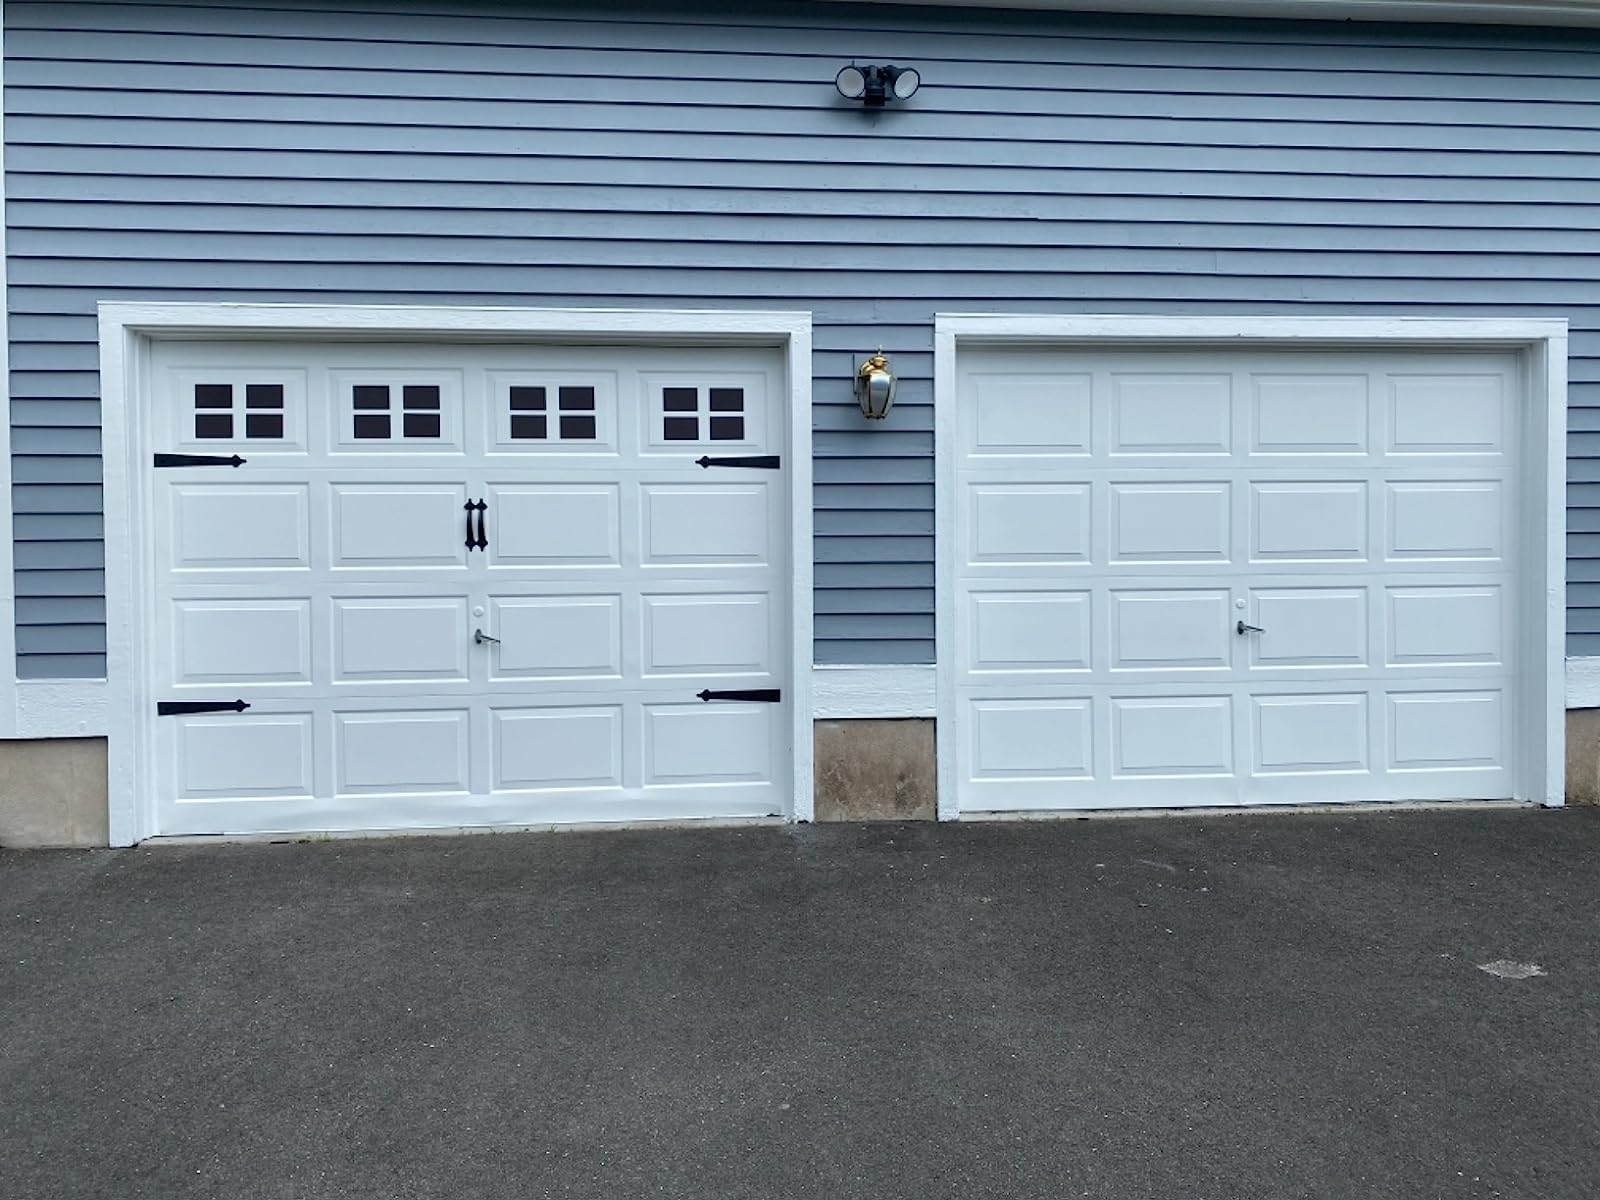 a reviewer photo of side by side garage doors, one with the magnets applied and one without